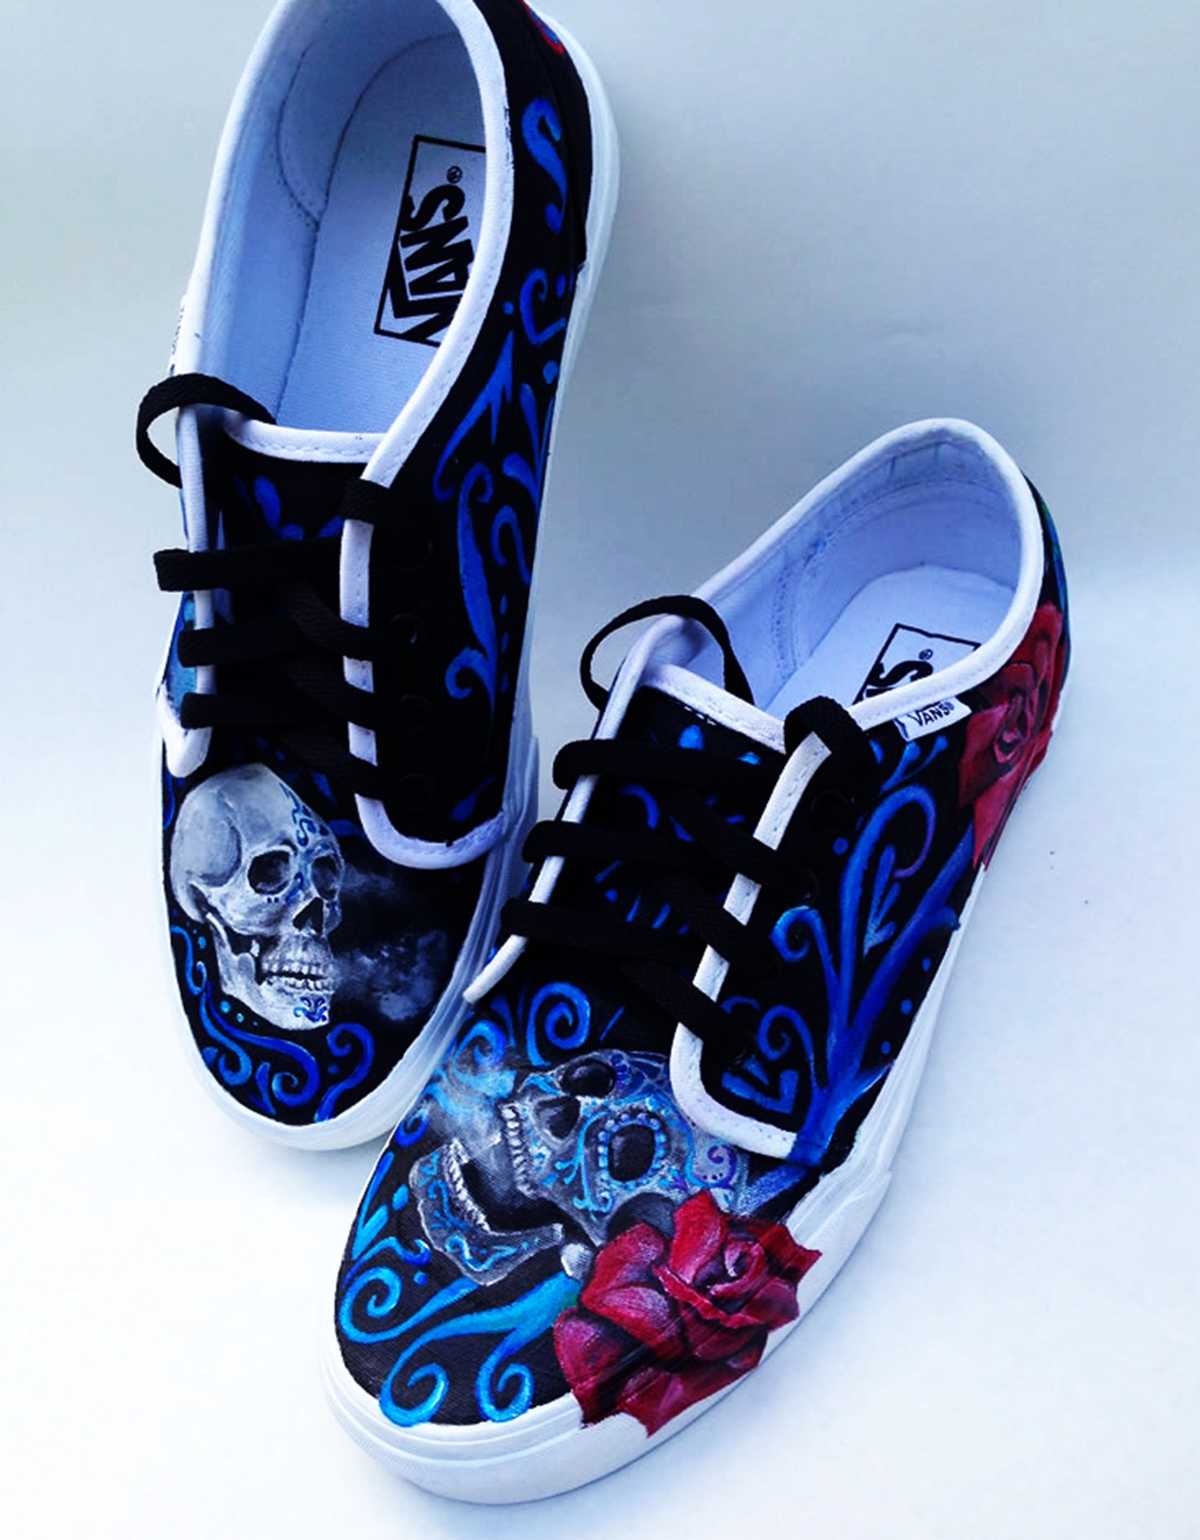 PHOTOS: Vans shoes painted by Marina High students